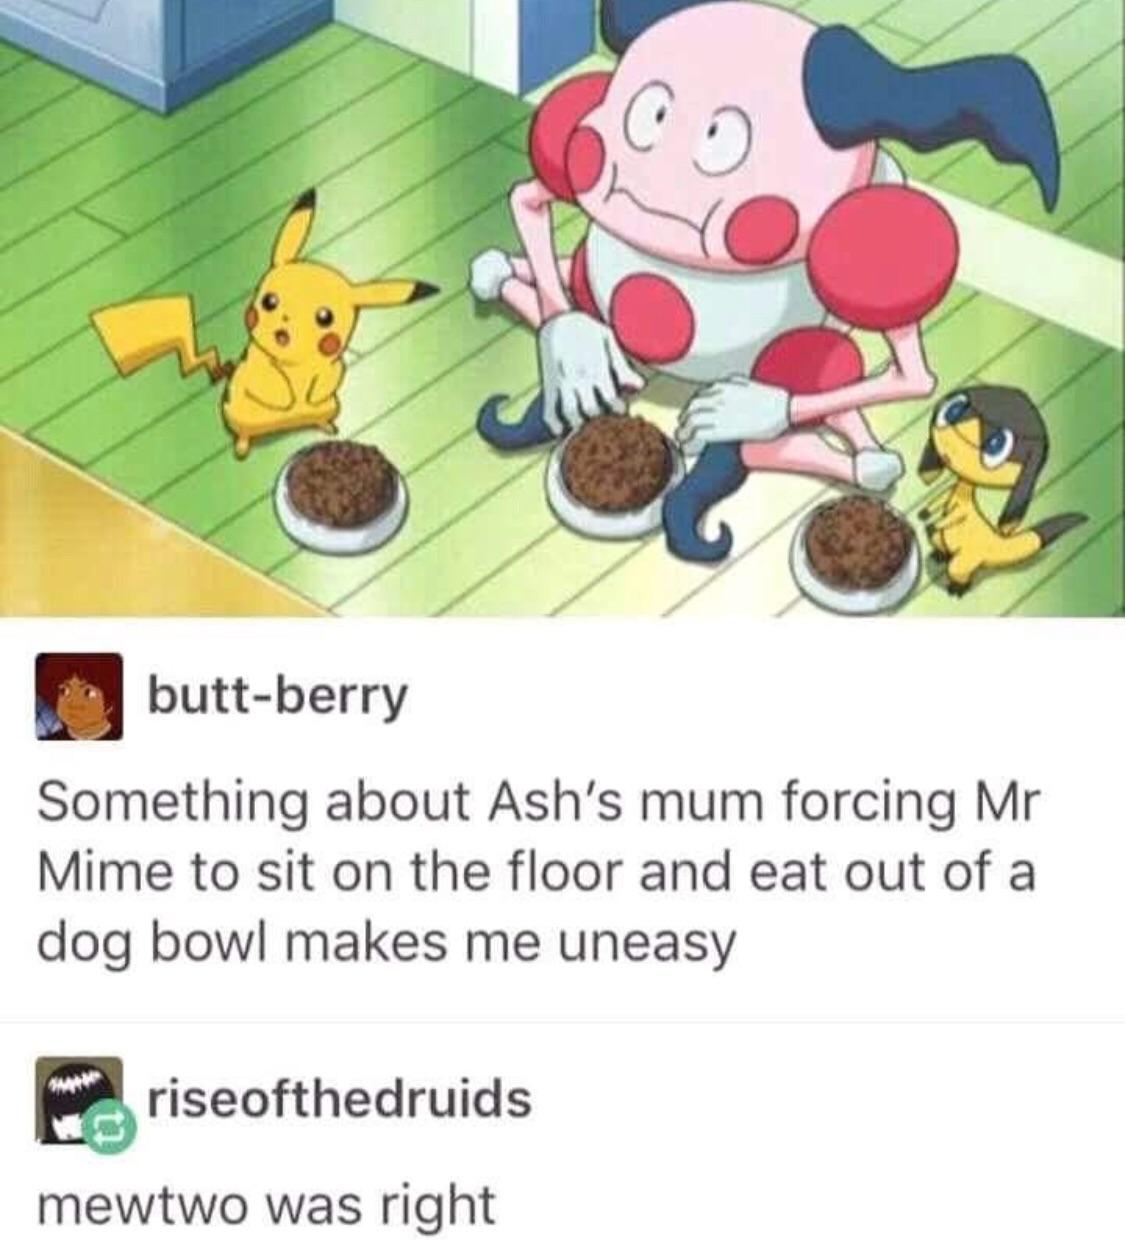 mr mime ash dad - buttberry Something about Ash's mum forcing Mr Mime to sit on the floor and eat out of a dog bowl makes me uneasy enriseofthedruids mewtwo was right